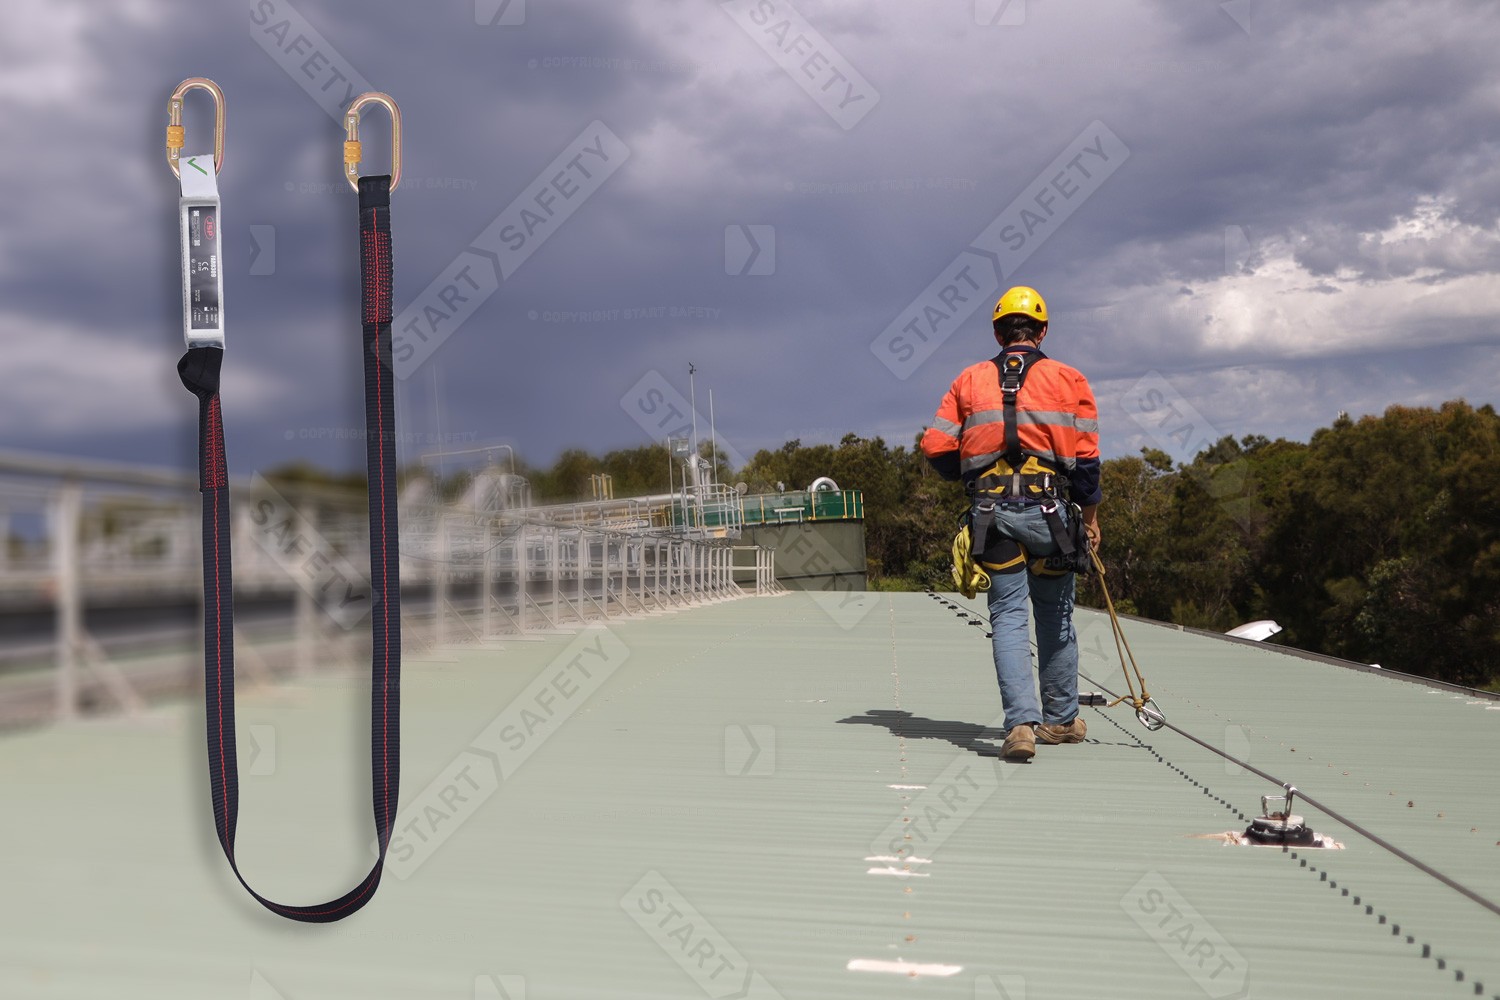 Spartan Single Fall Arrest Lanyard For Working On Rooftops